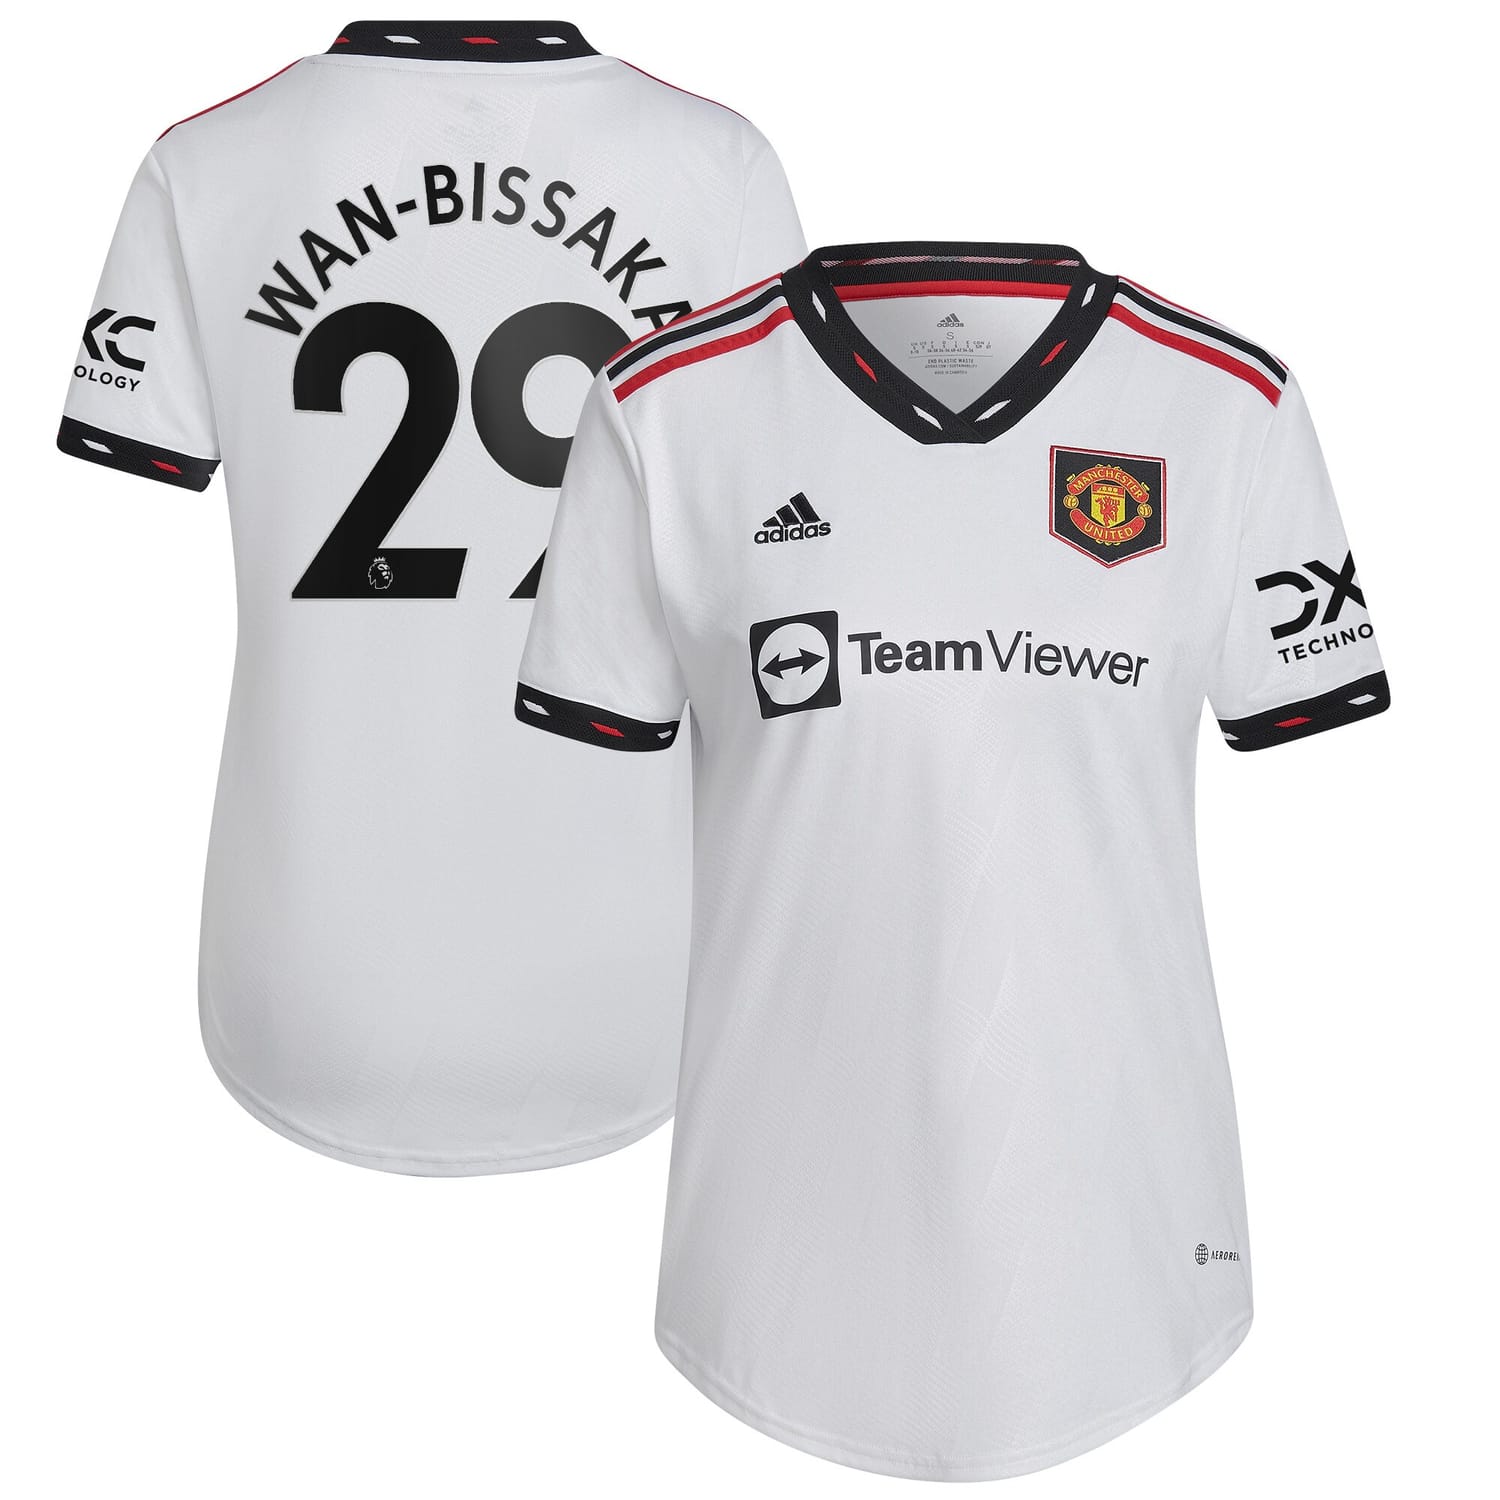 Premier League Manchester United Away Jersey Shirt White 2022-23 player Aaron Wan-Bissaka printing for Women